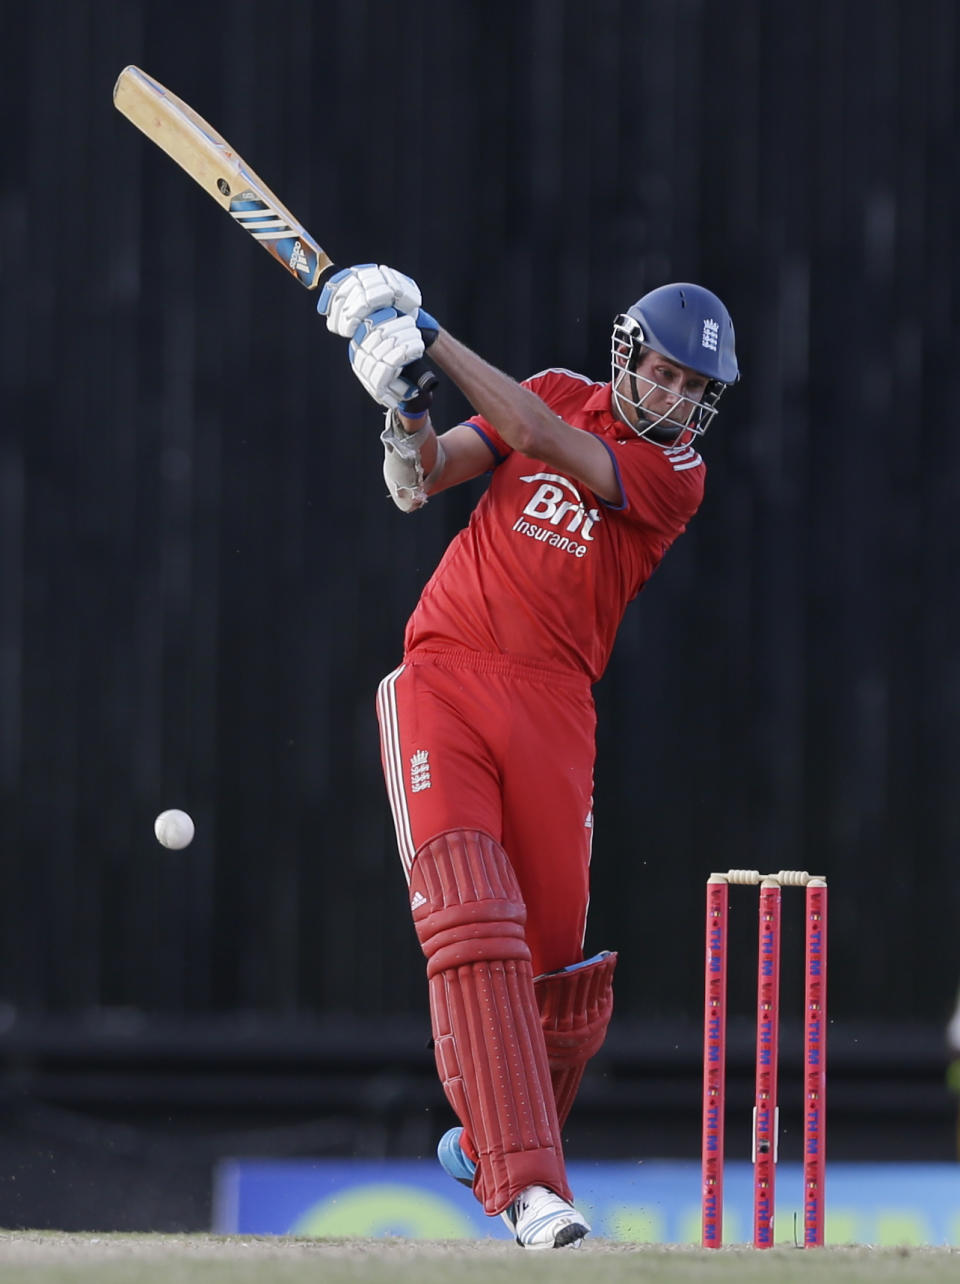 England's captain Stuart Broad bats during the second one-day international cricket match against West Indies at the Sir Vivian Richards Cricket Ground in St. John's, Antigua, Sunday, March 2, 2014. (AP Photo/Ricardo Mazalan)